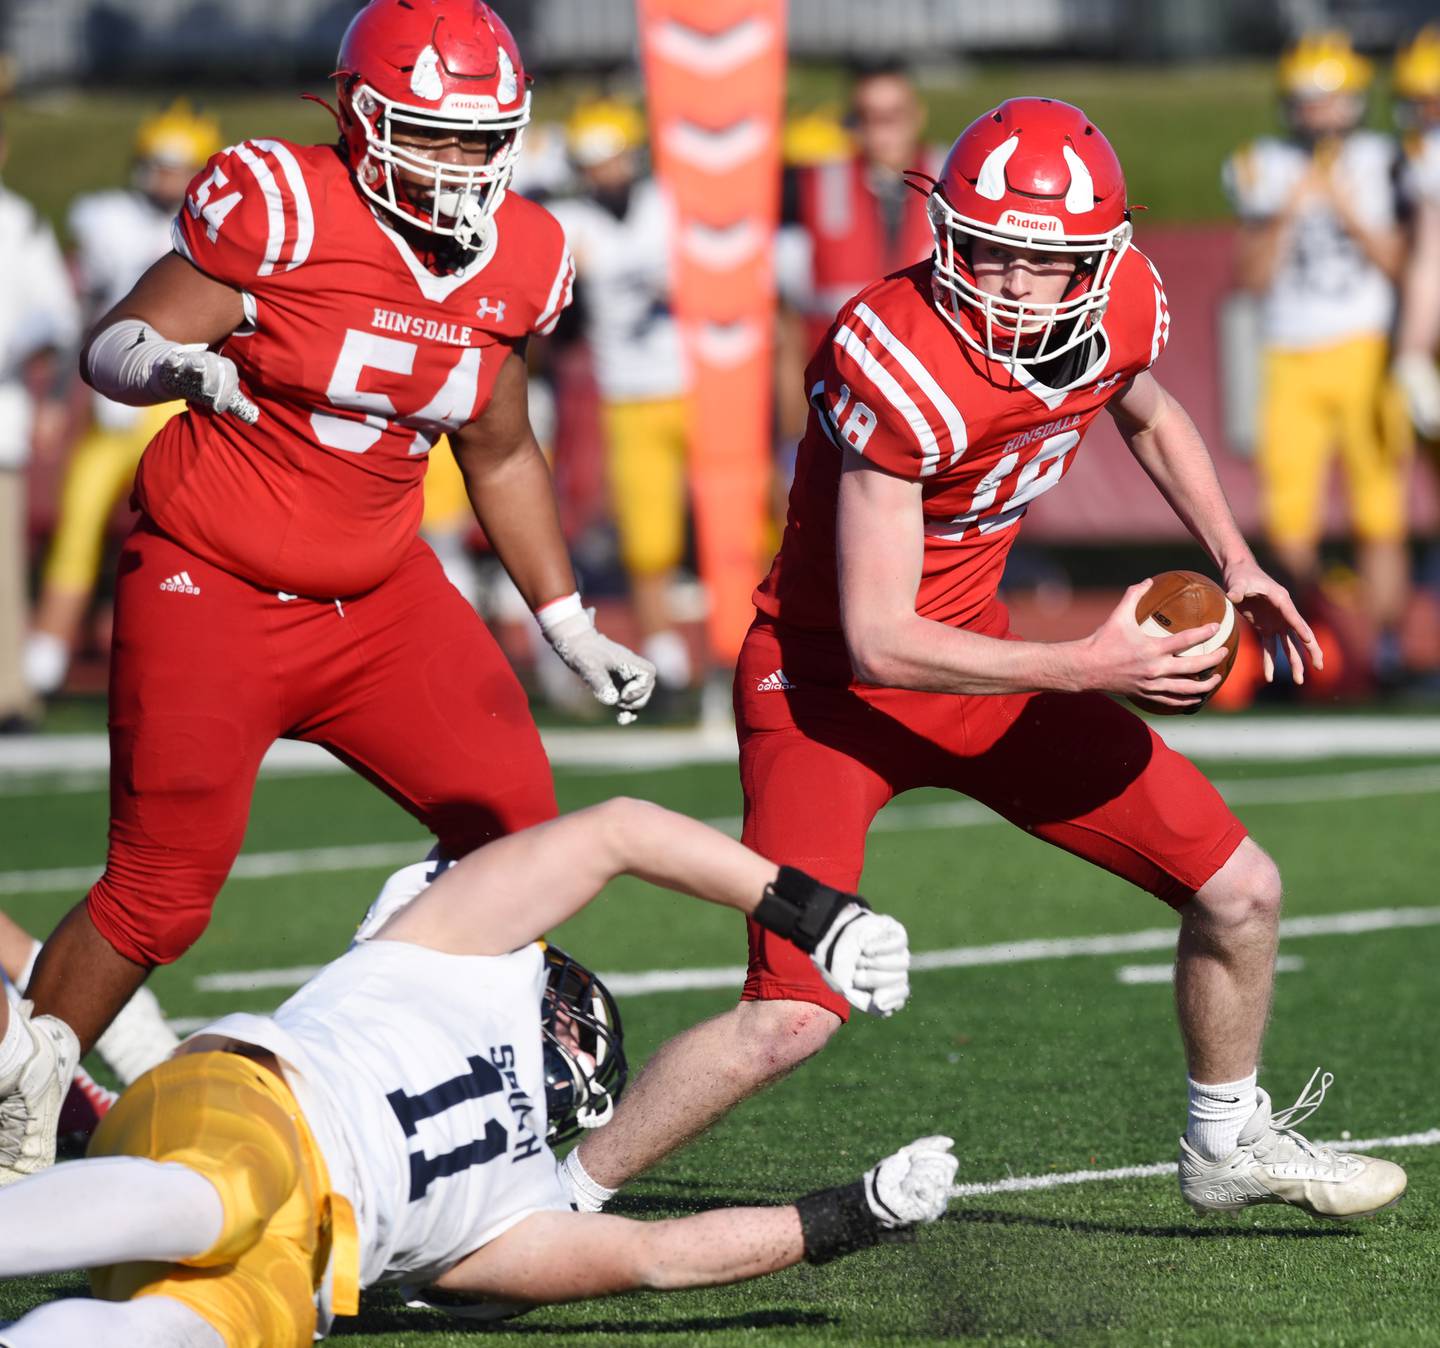 Hindale Central quarterback Billy Cernugel, right, avoids an attempted sack by Glenbrook South's Jacque Gasriepy during the second round of the Class 8A high school football playoffs in Hinsdale Saturday. Hinsdale Central 54 is Josh Narcisse.